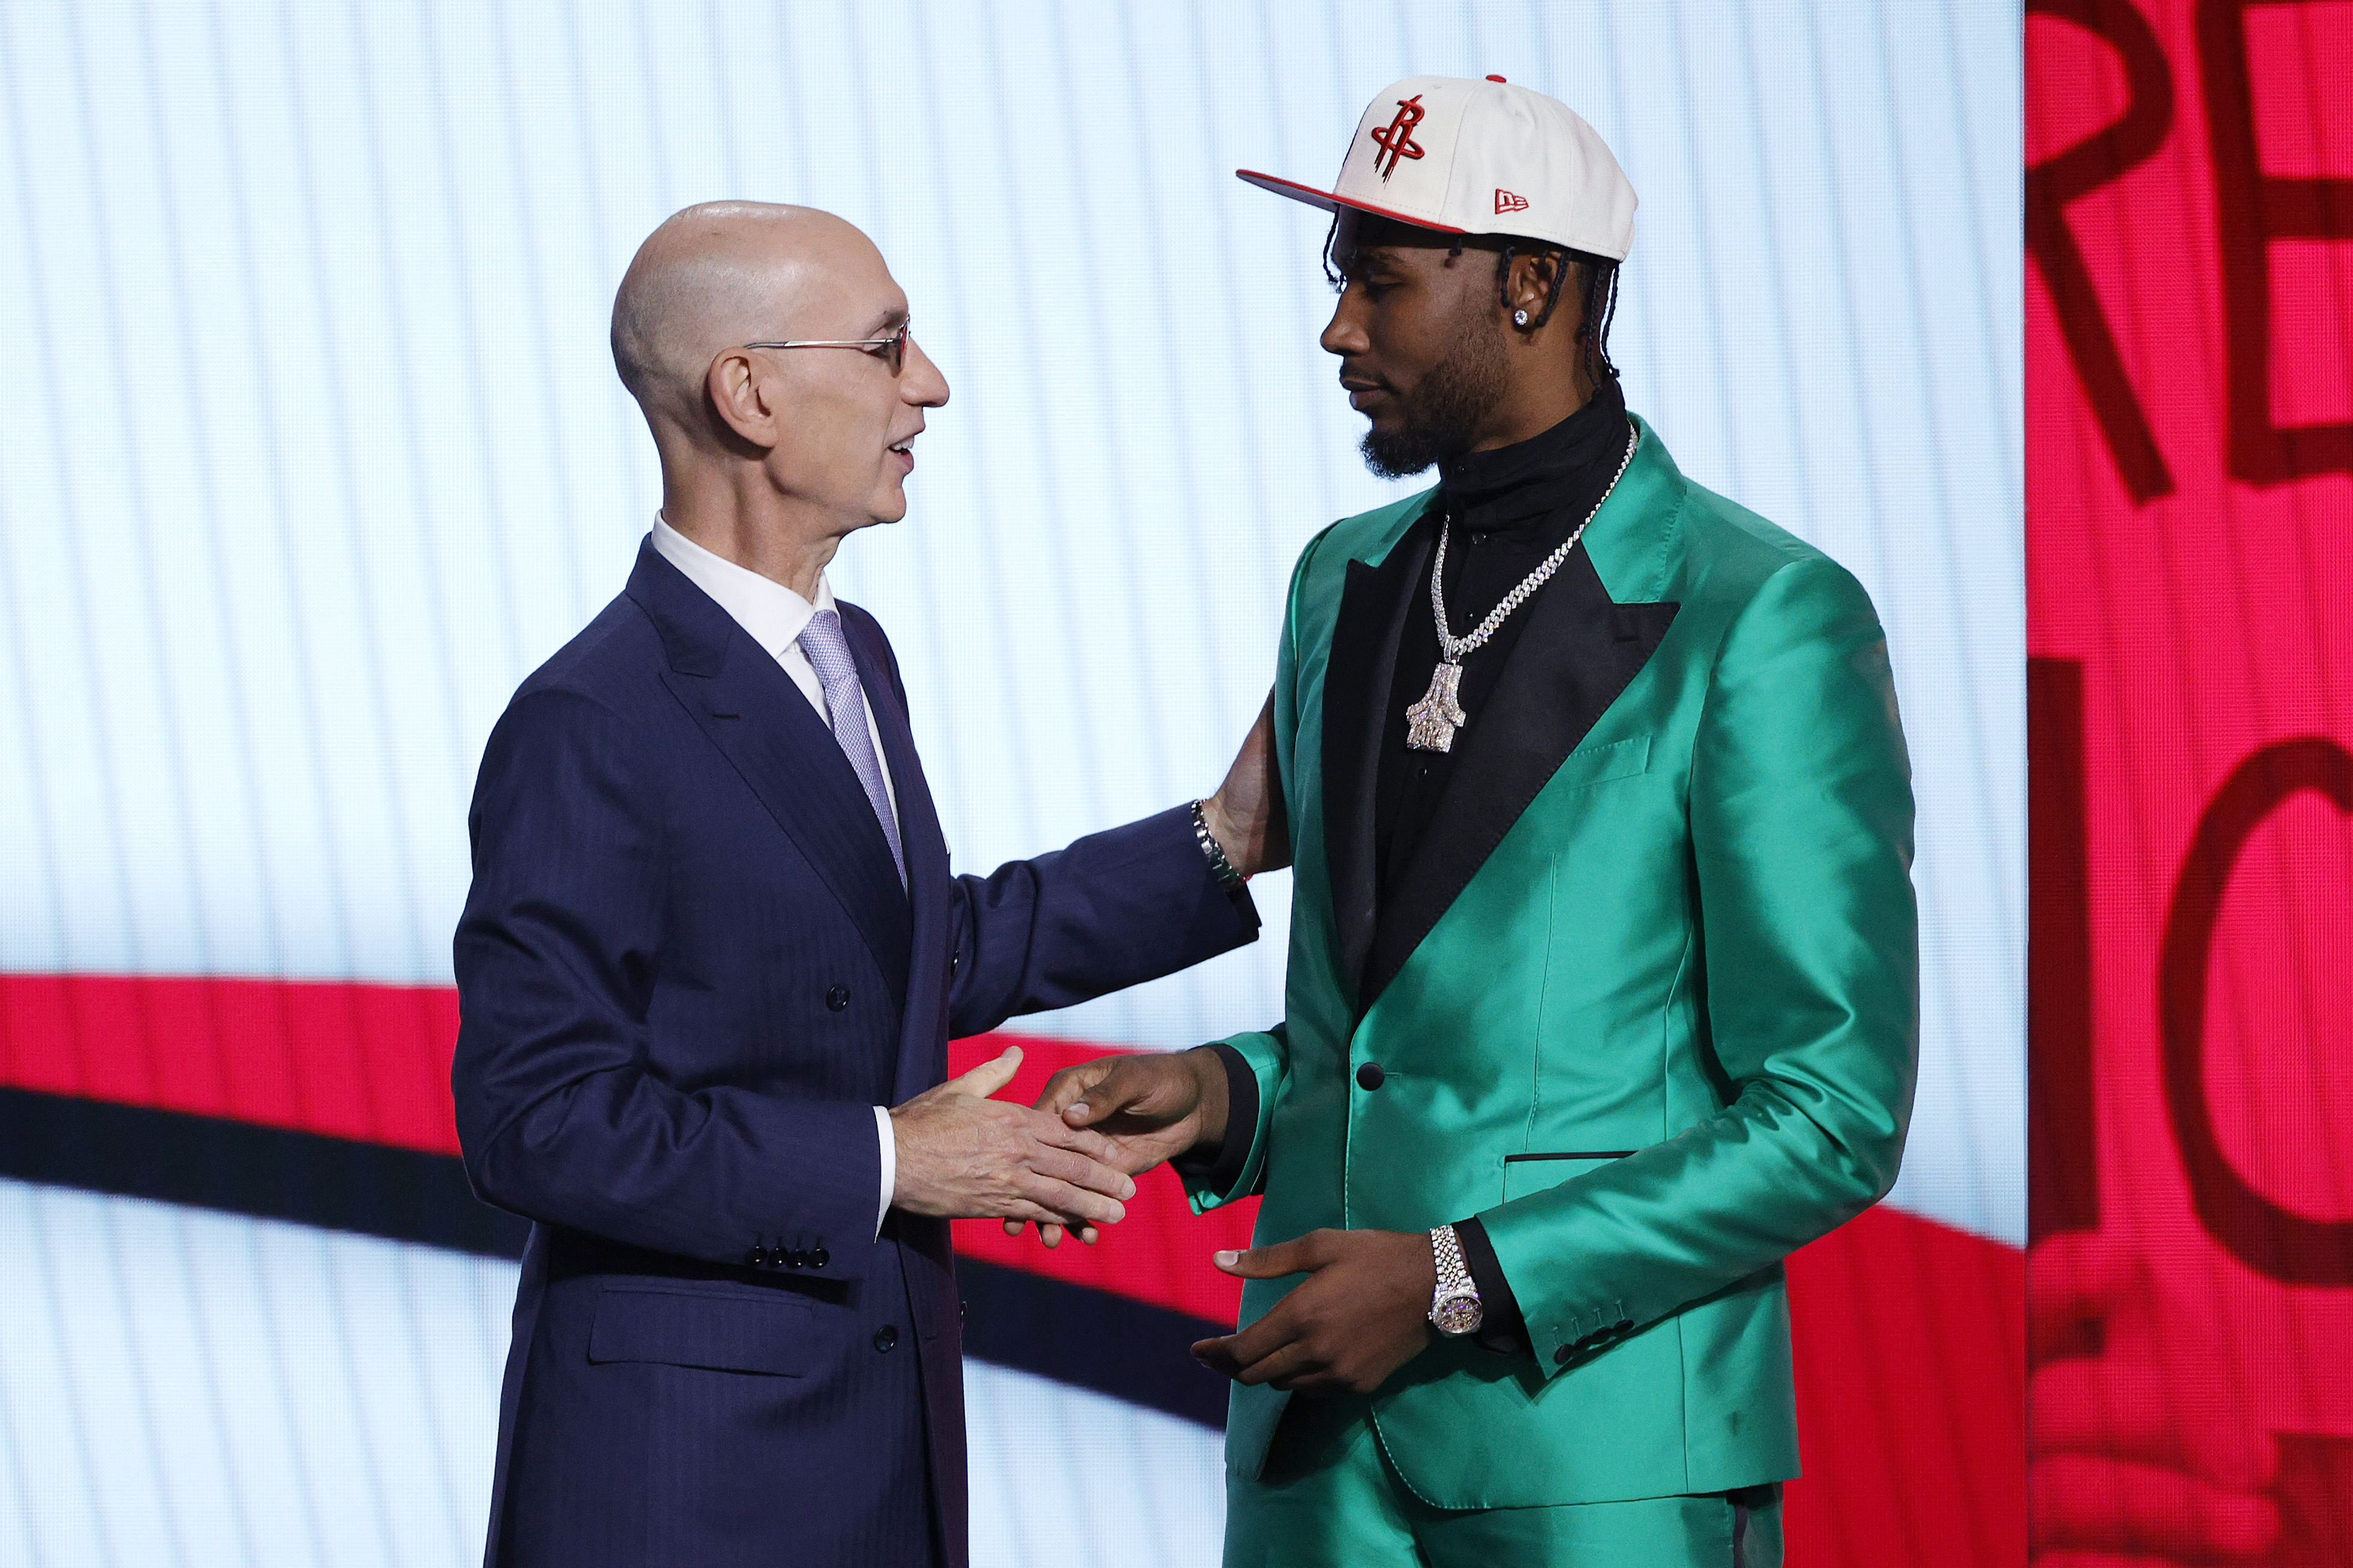 NBA Draft 2022: Grades for all 30 first-round picks